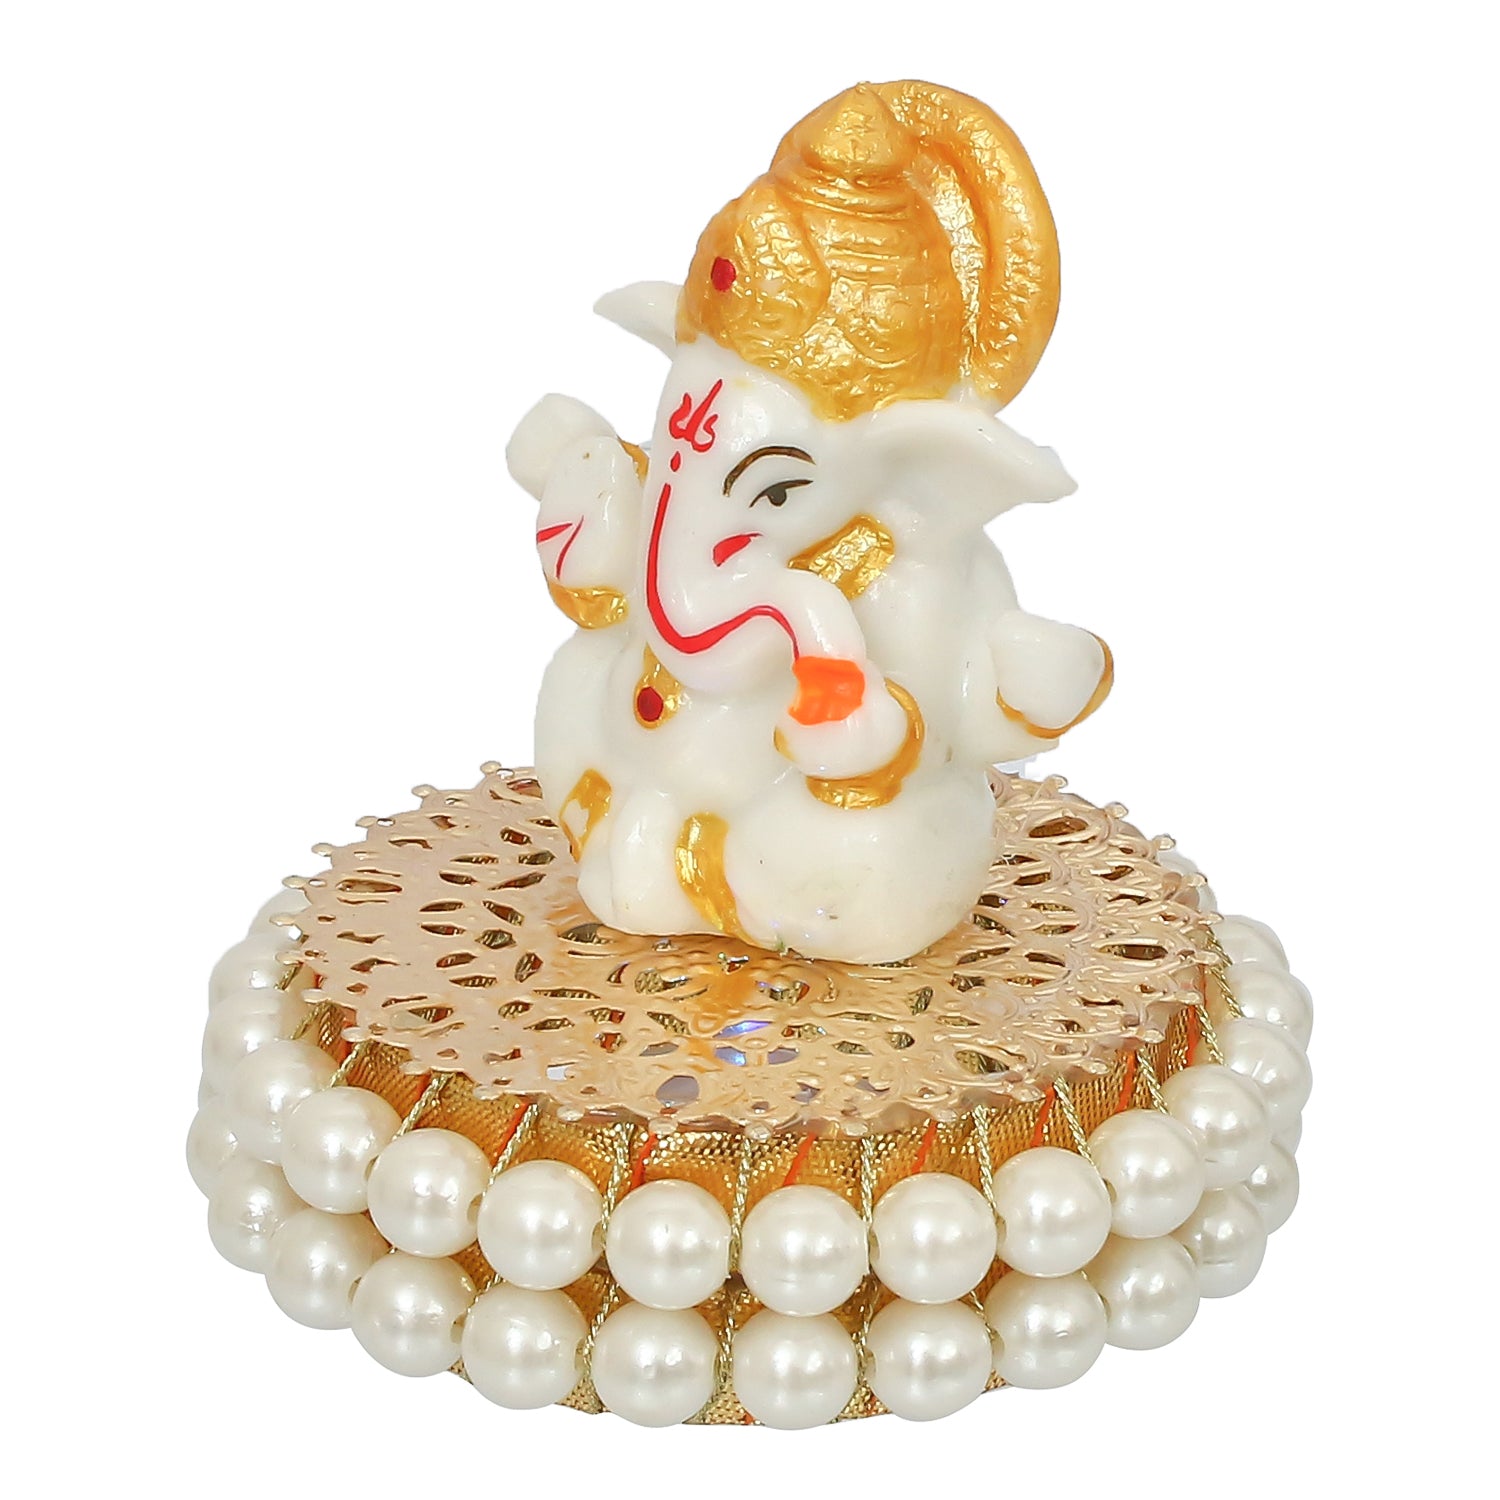 Gold and White Polyresin Lord Ganesha Idol on Decorative Handcrafted Plate for Home and Car Dashboard 7